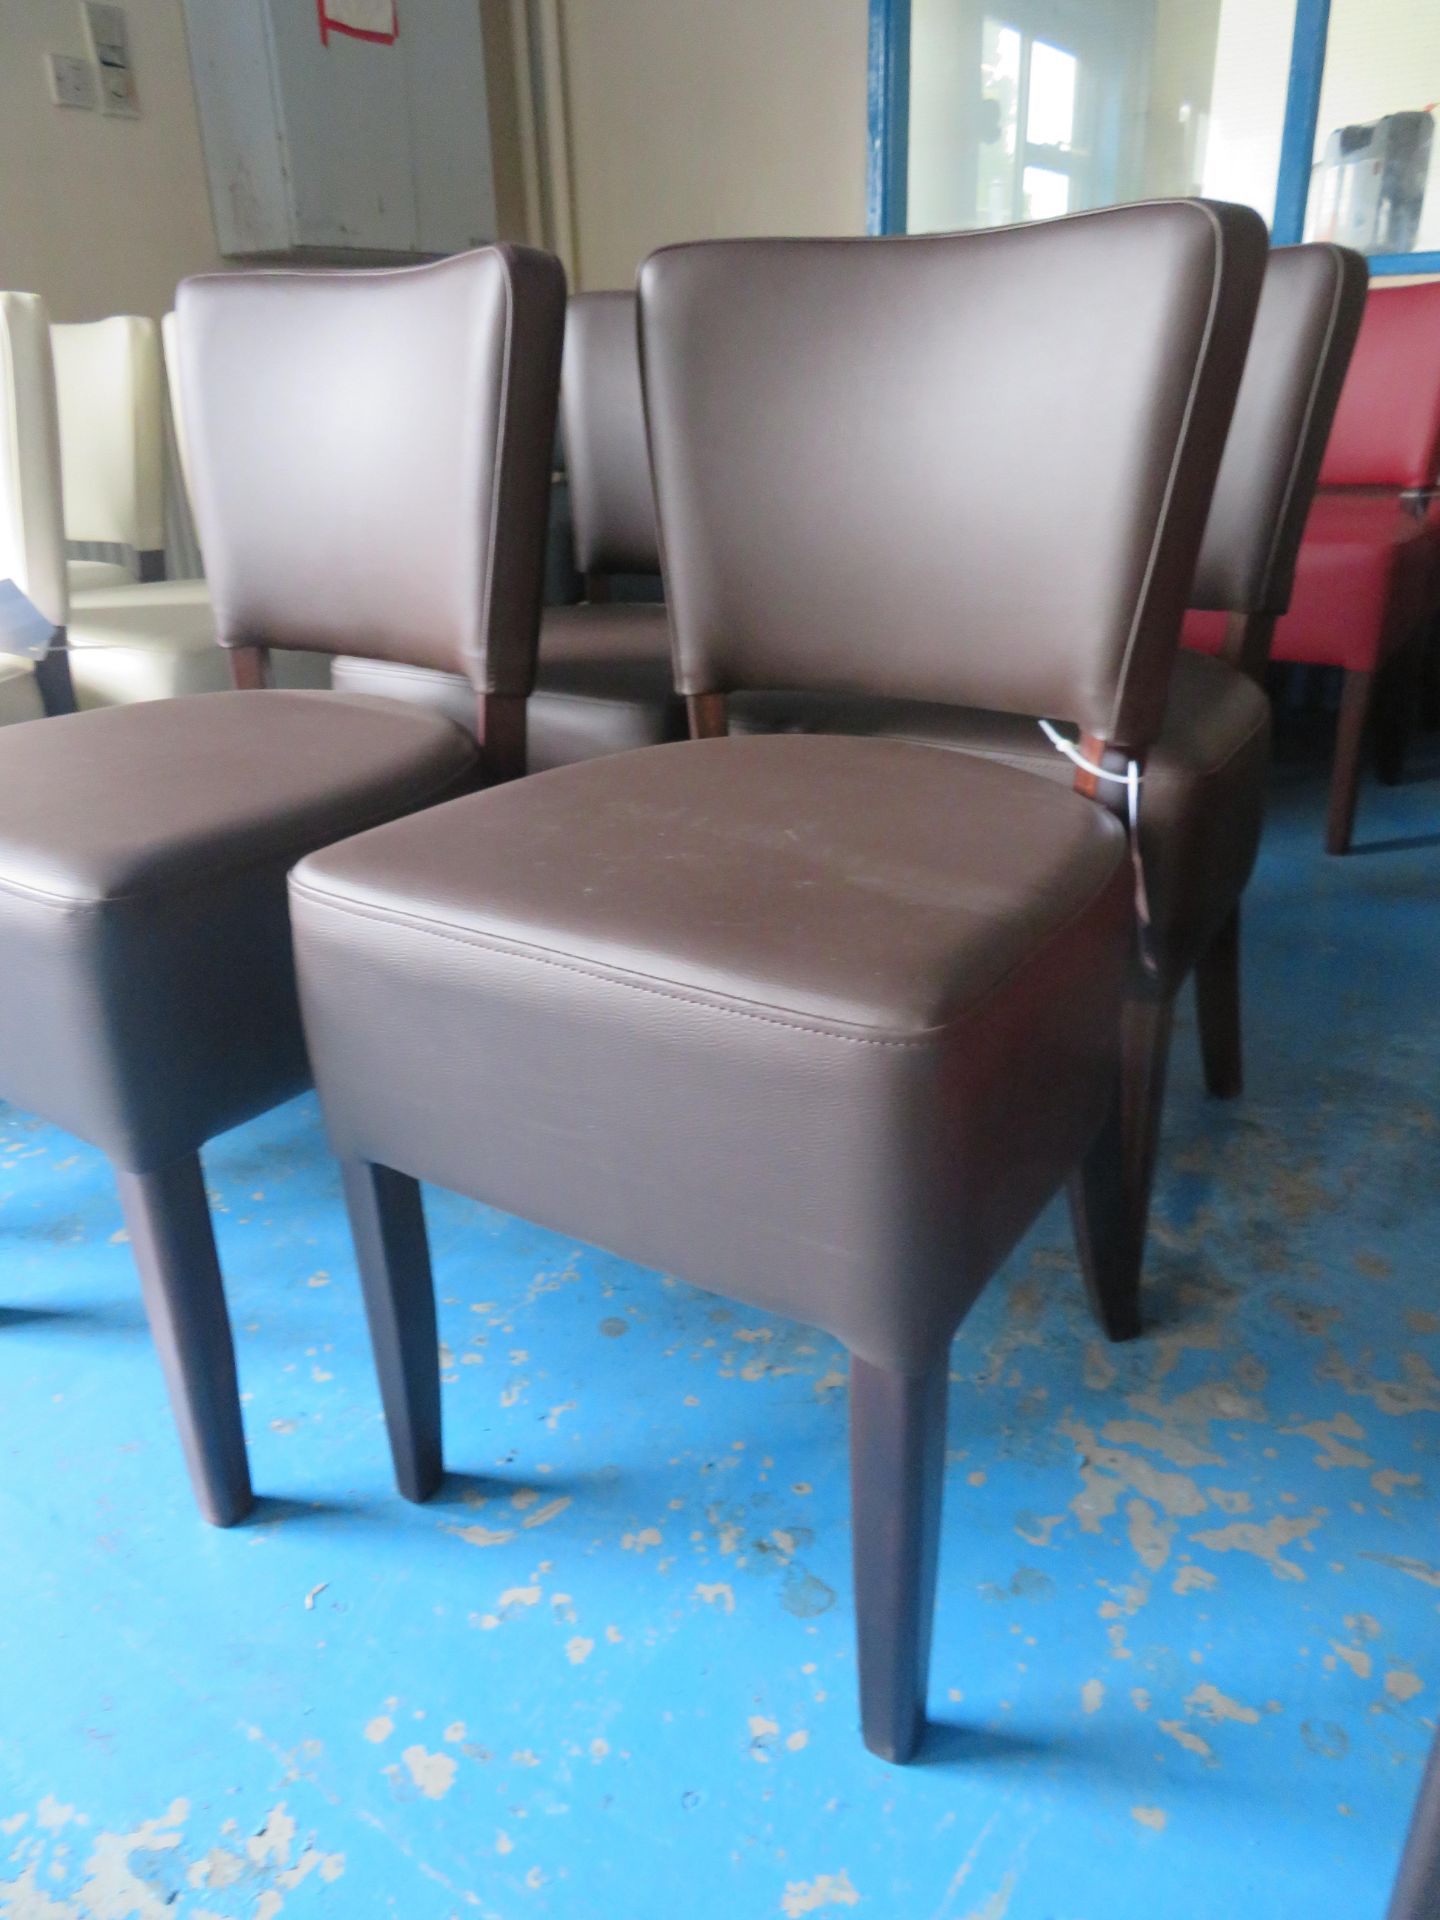 4x Faux leather standard side chair (Brown) - Image 2 of 2